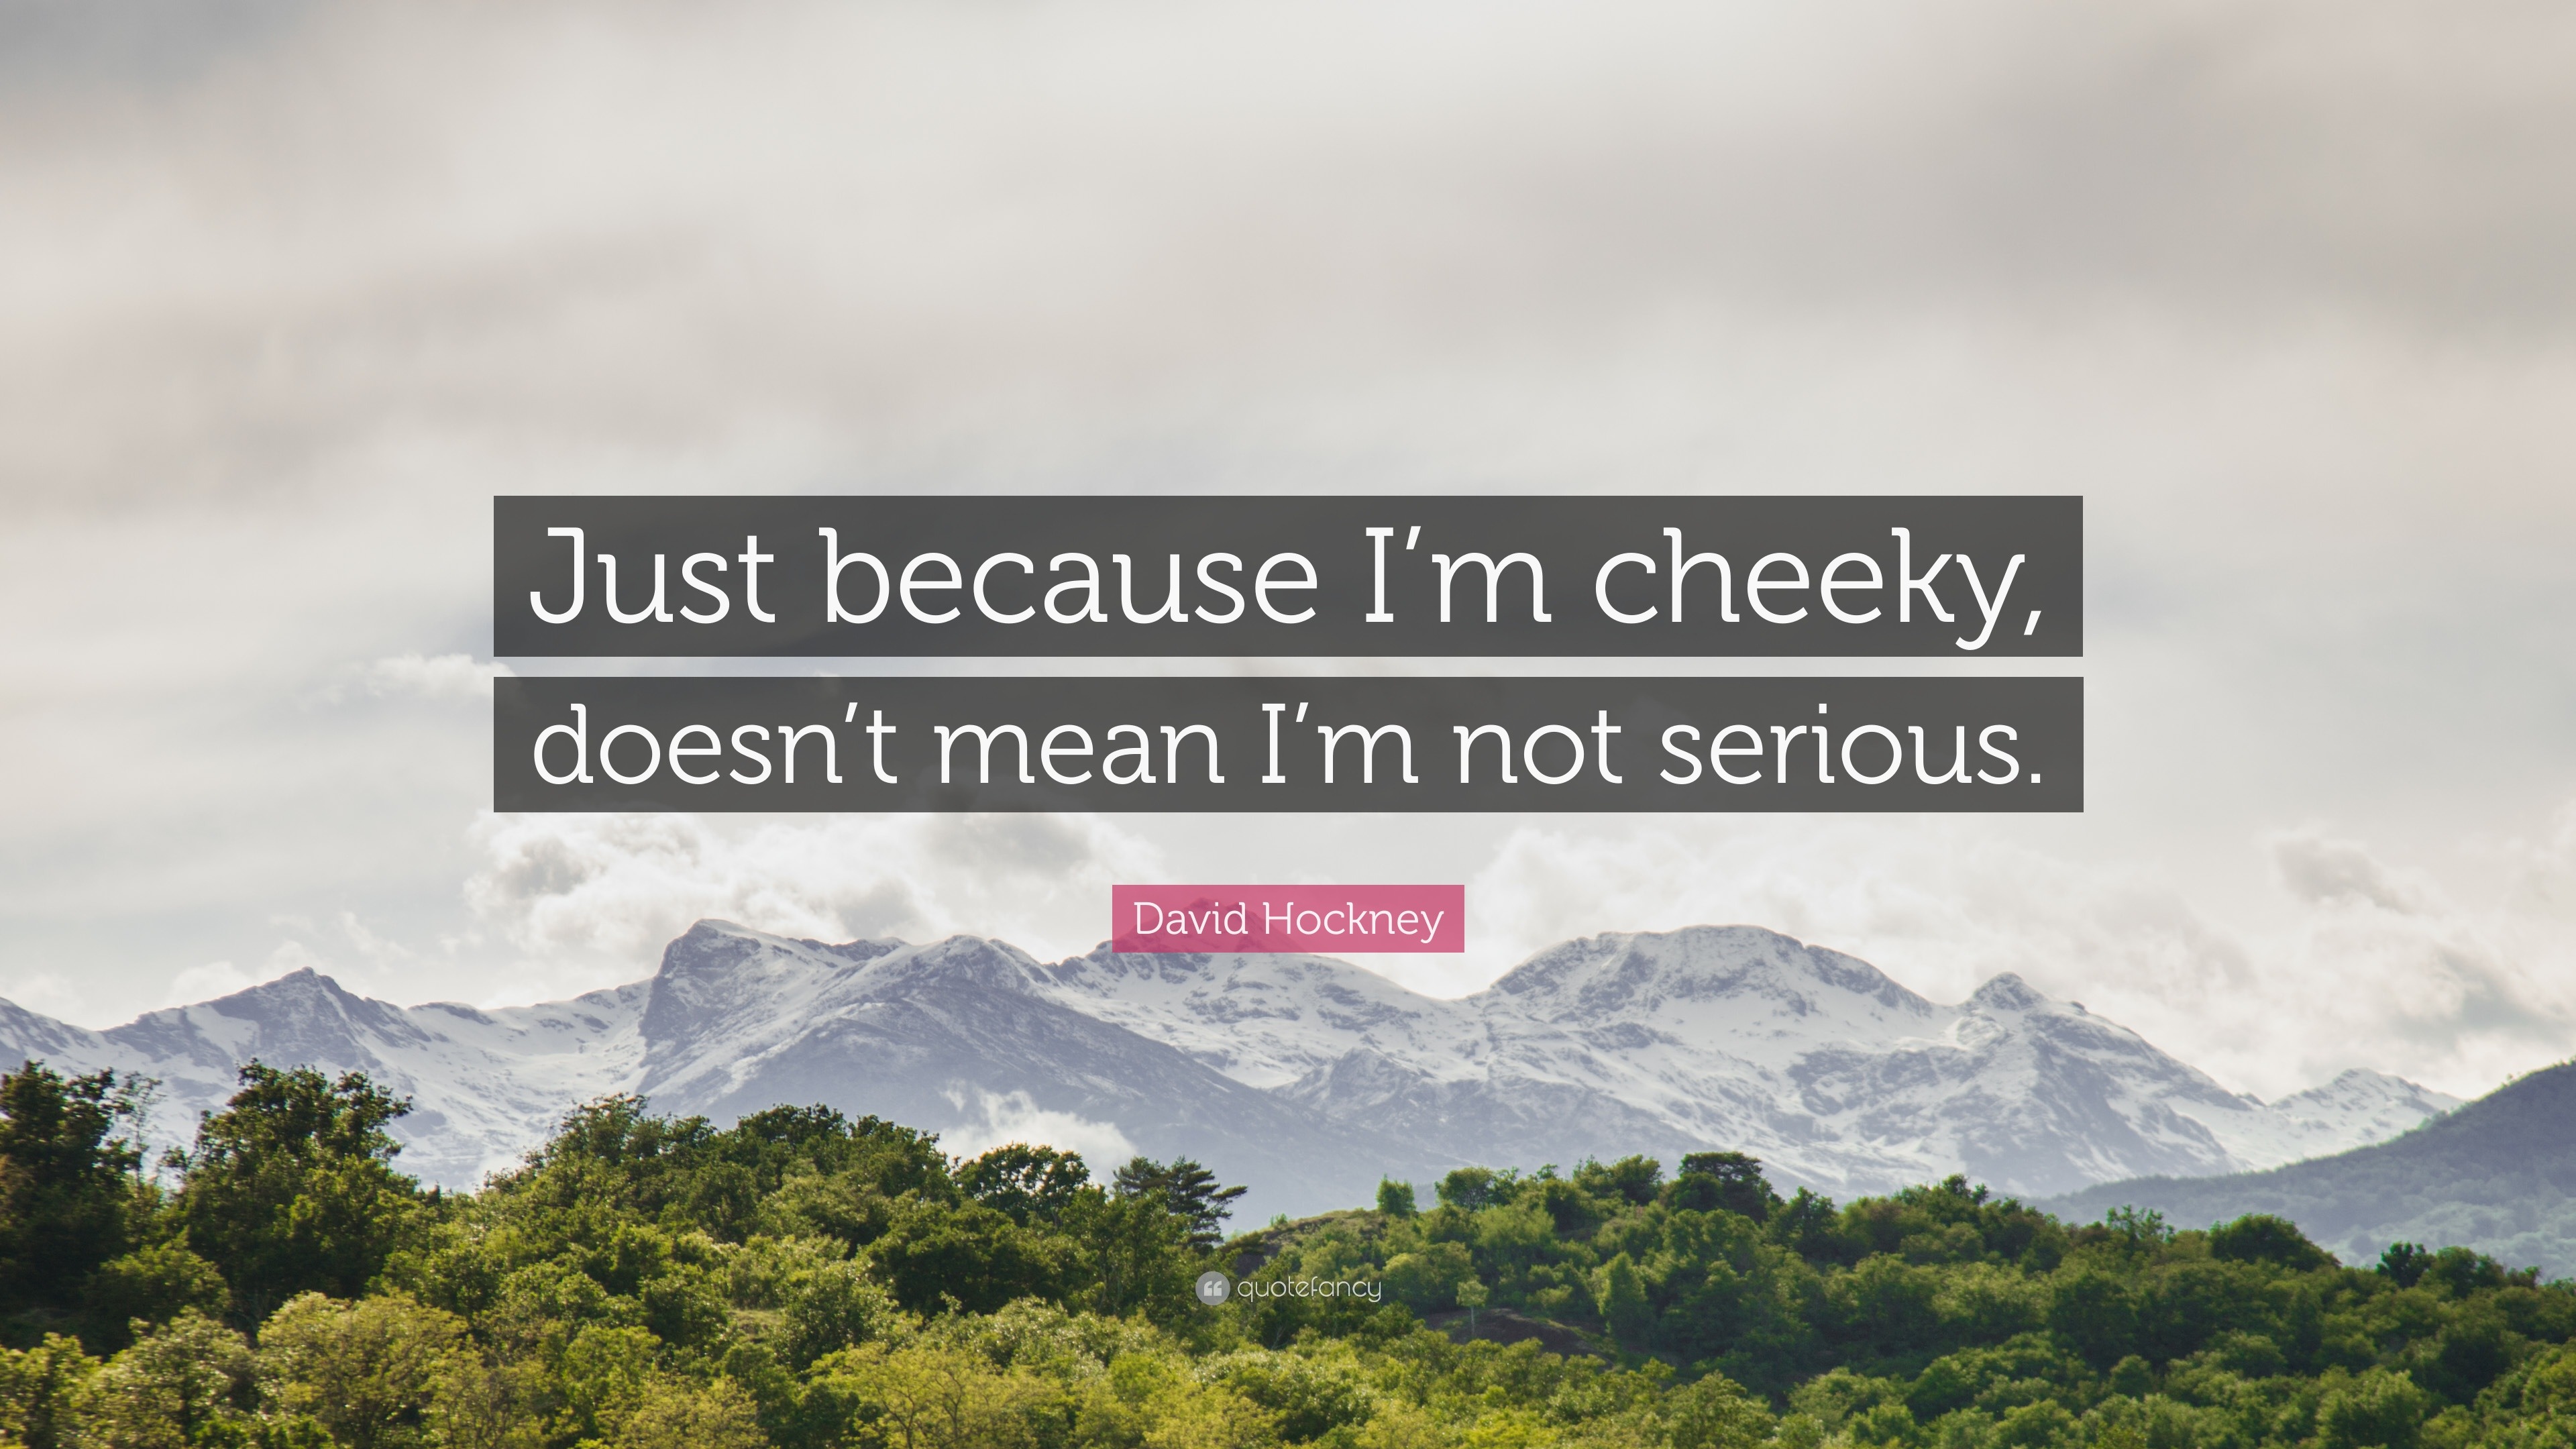 David Hockney Quote: “Just because I'm cheeky, doesn't mean I'm not  serious.”